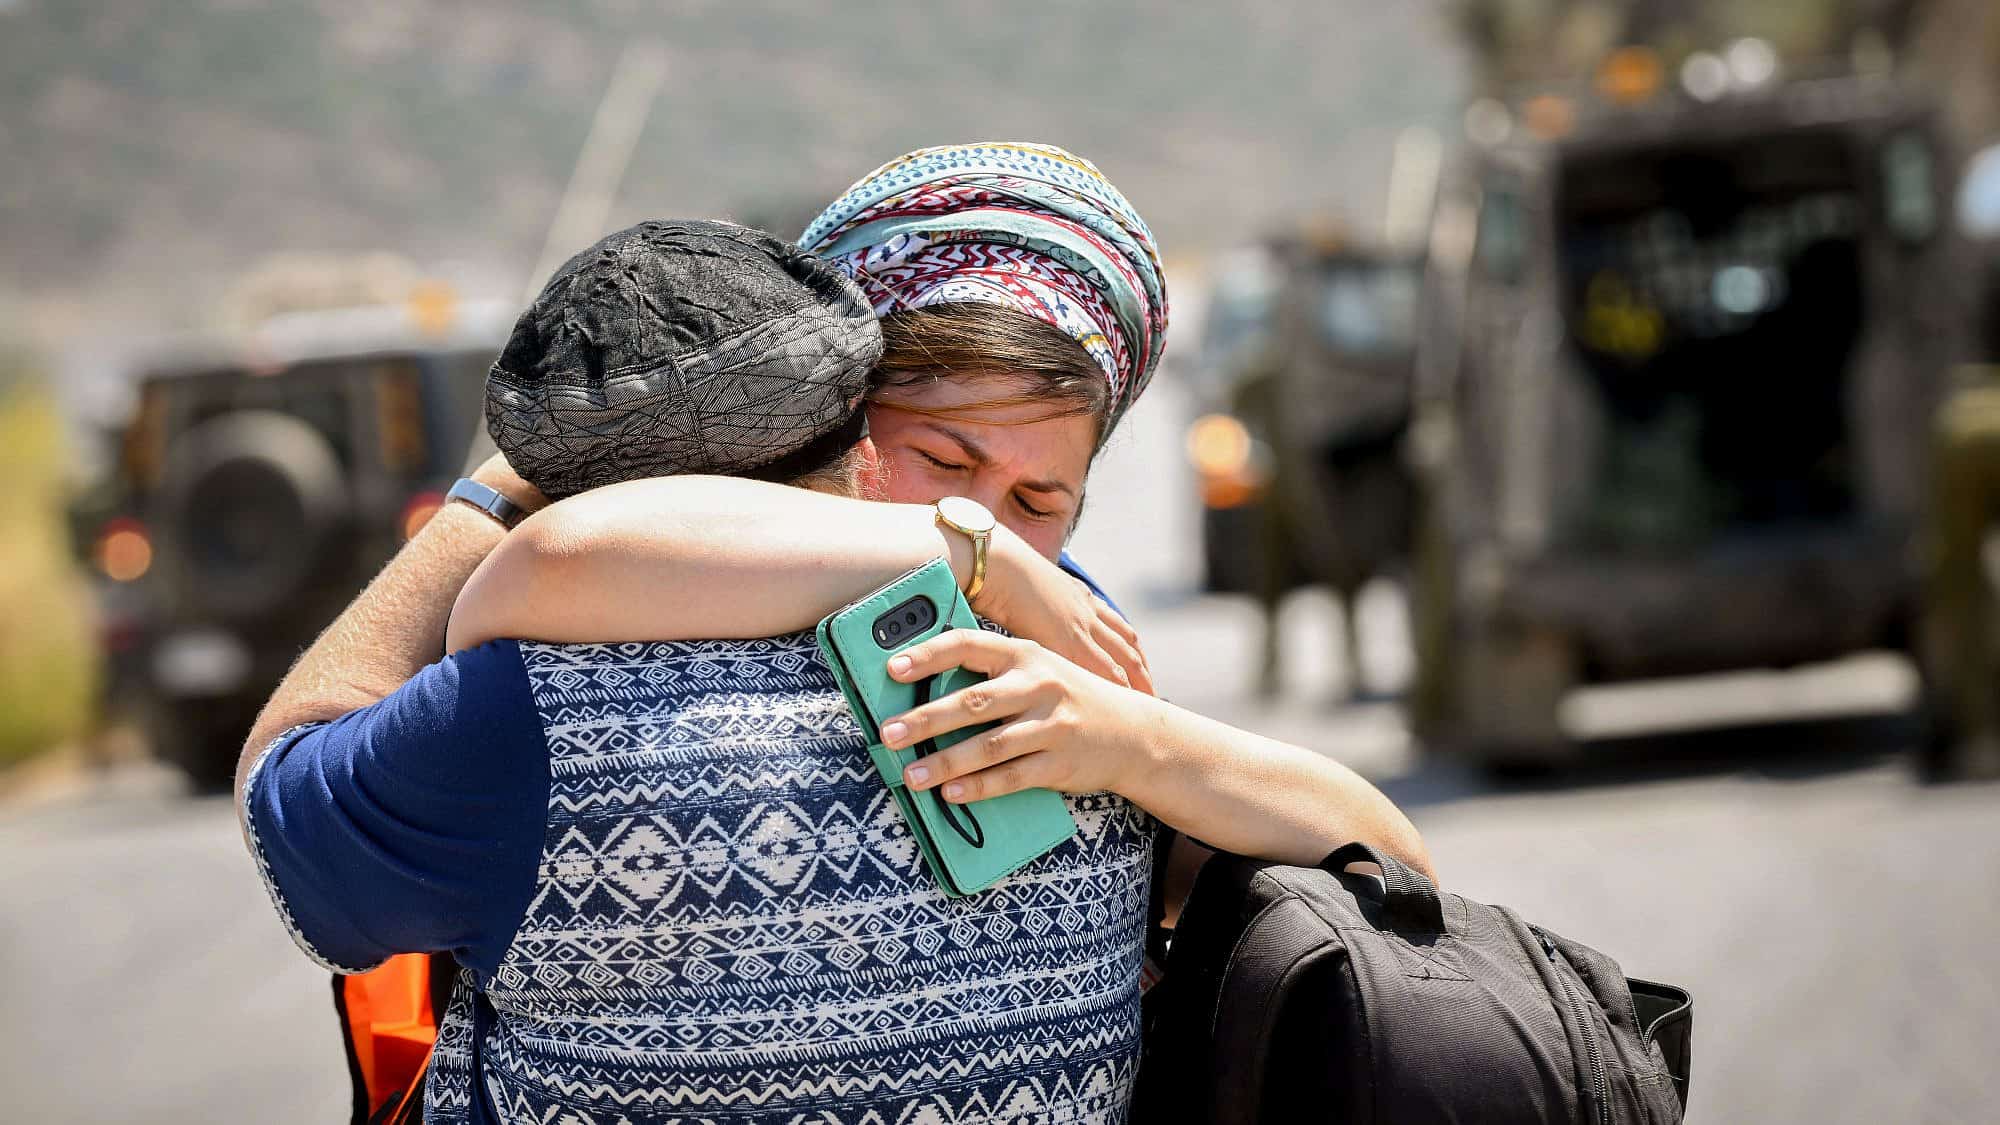 Women at the scene of a terrorist attack near Danny Spring, or Ein Bubin, in the Binyamin region of Samaria on Aug. 23, 2019. A father and his two children were seriously wounded when a grenade or improvised explosive device was thrown at them. Credit: Flash90.